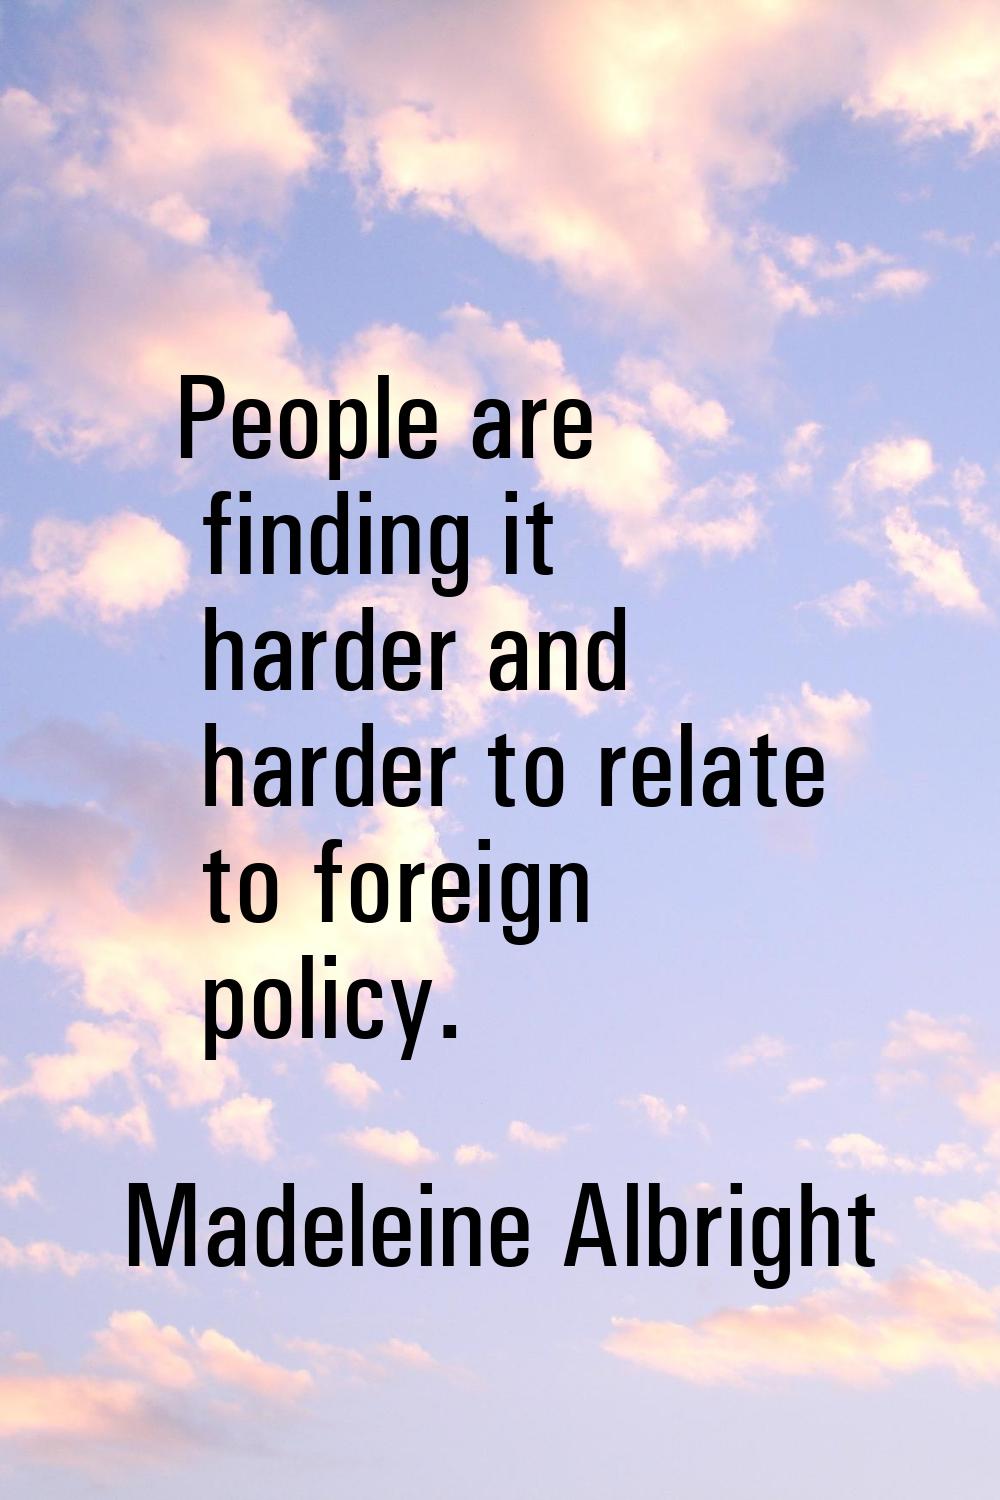 People are finding it harder and harder to relate to foreign policy.